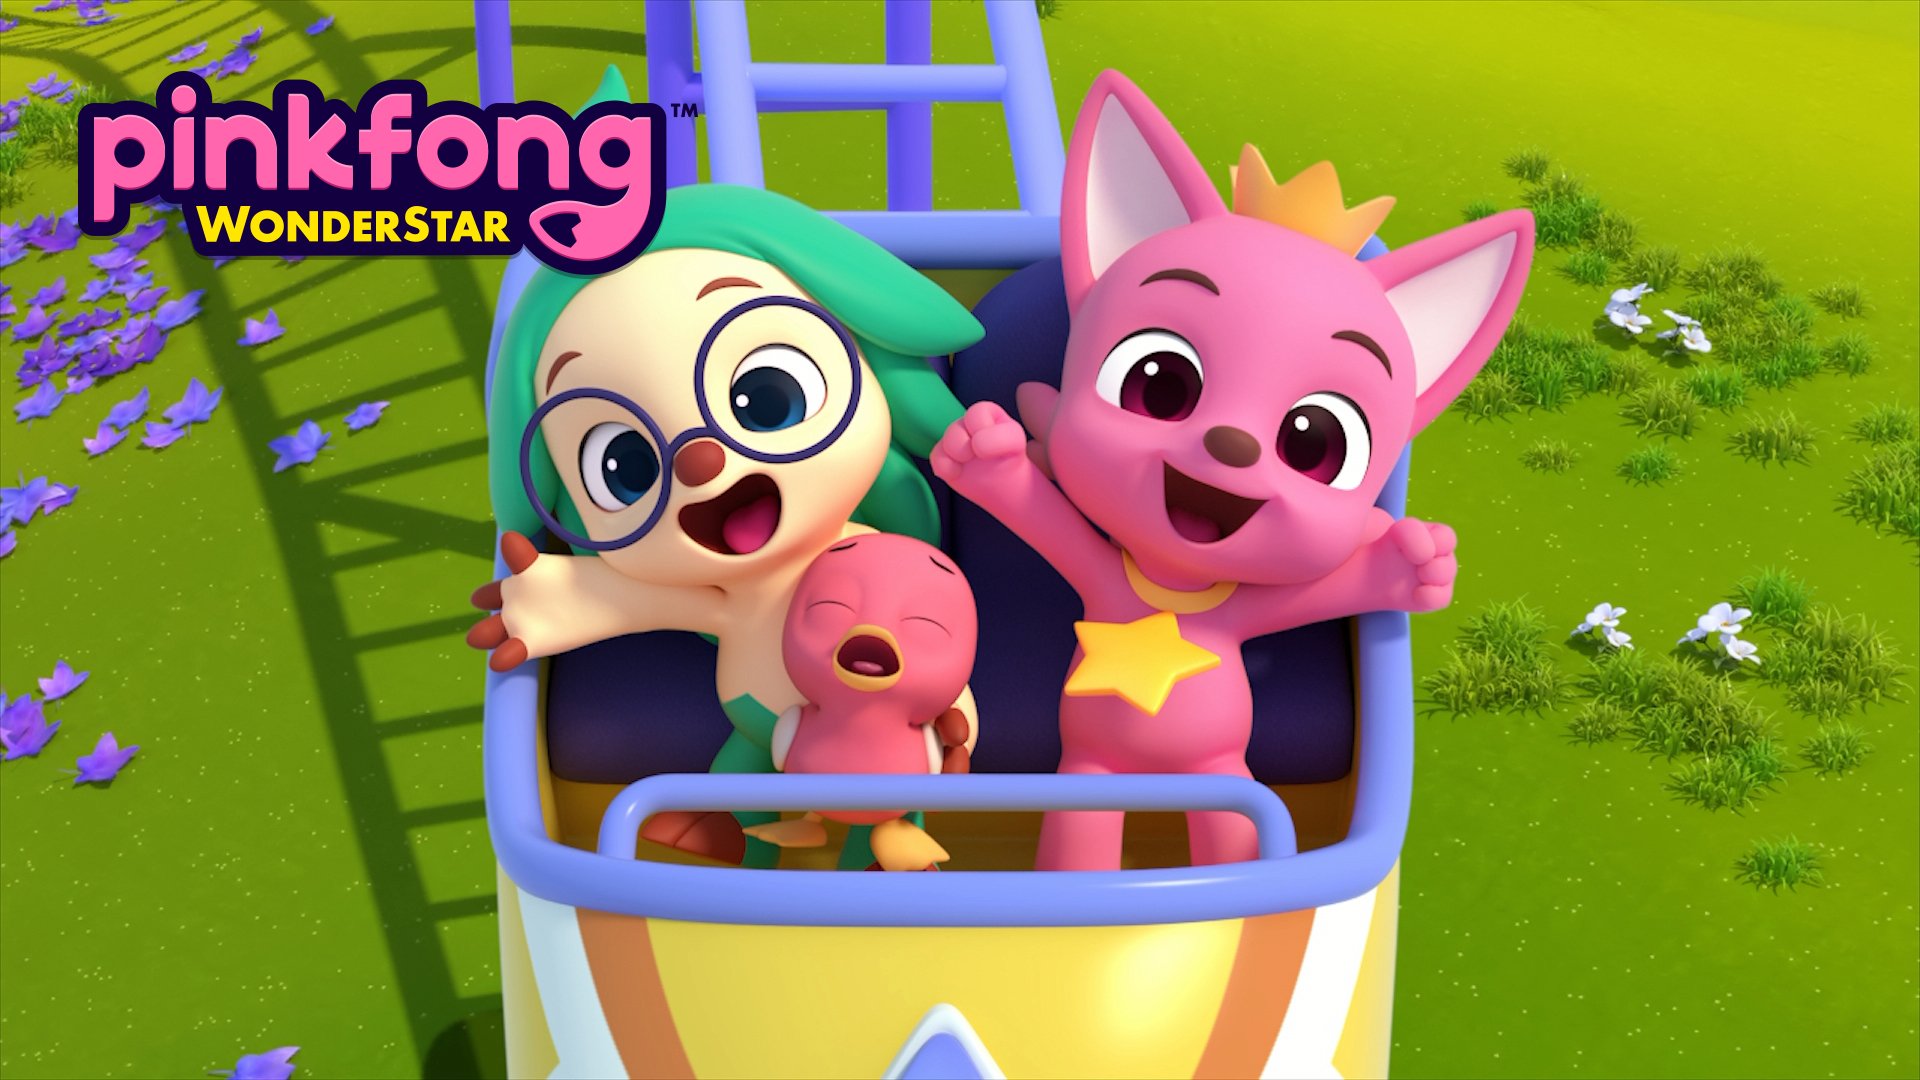 Pinkfong Wonderstar (Part 2) (Bilingual) S1 | What's On ...
